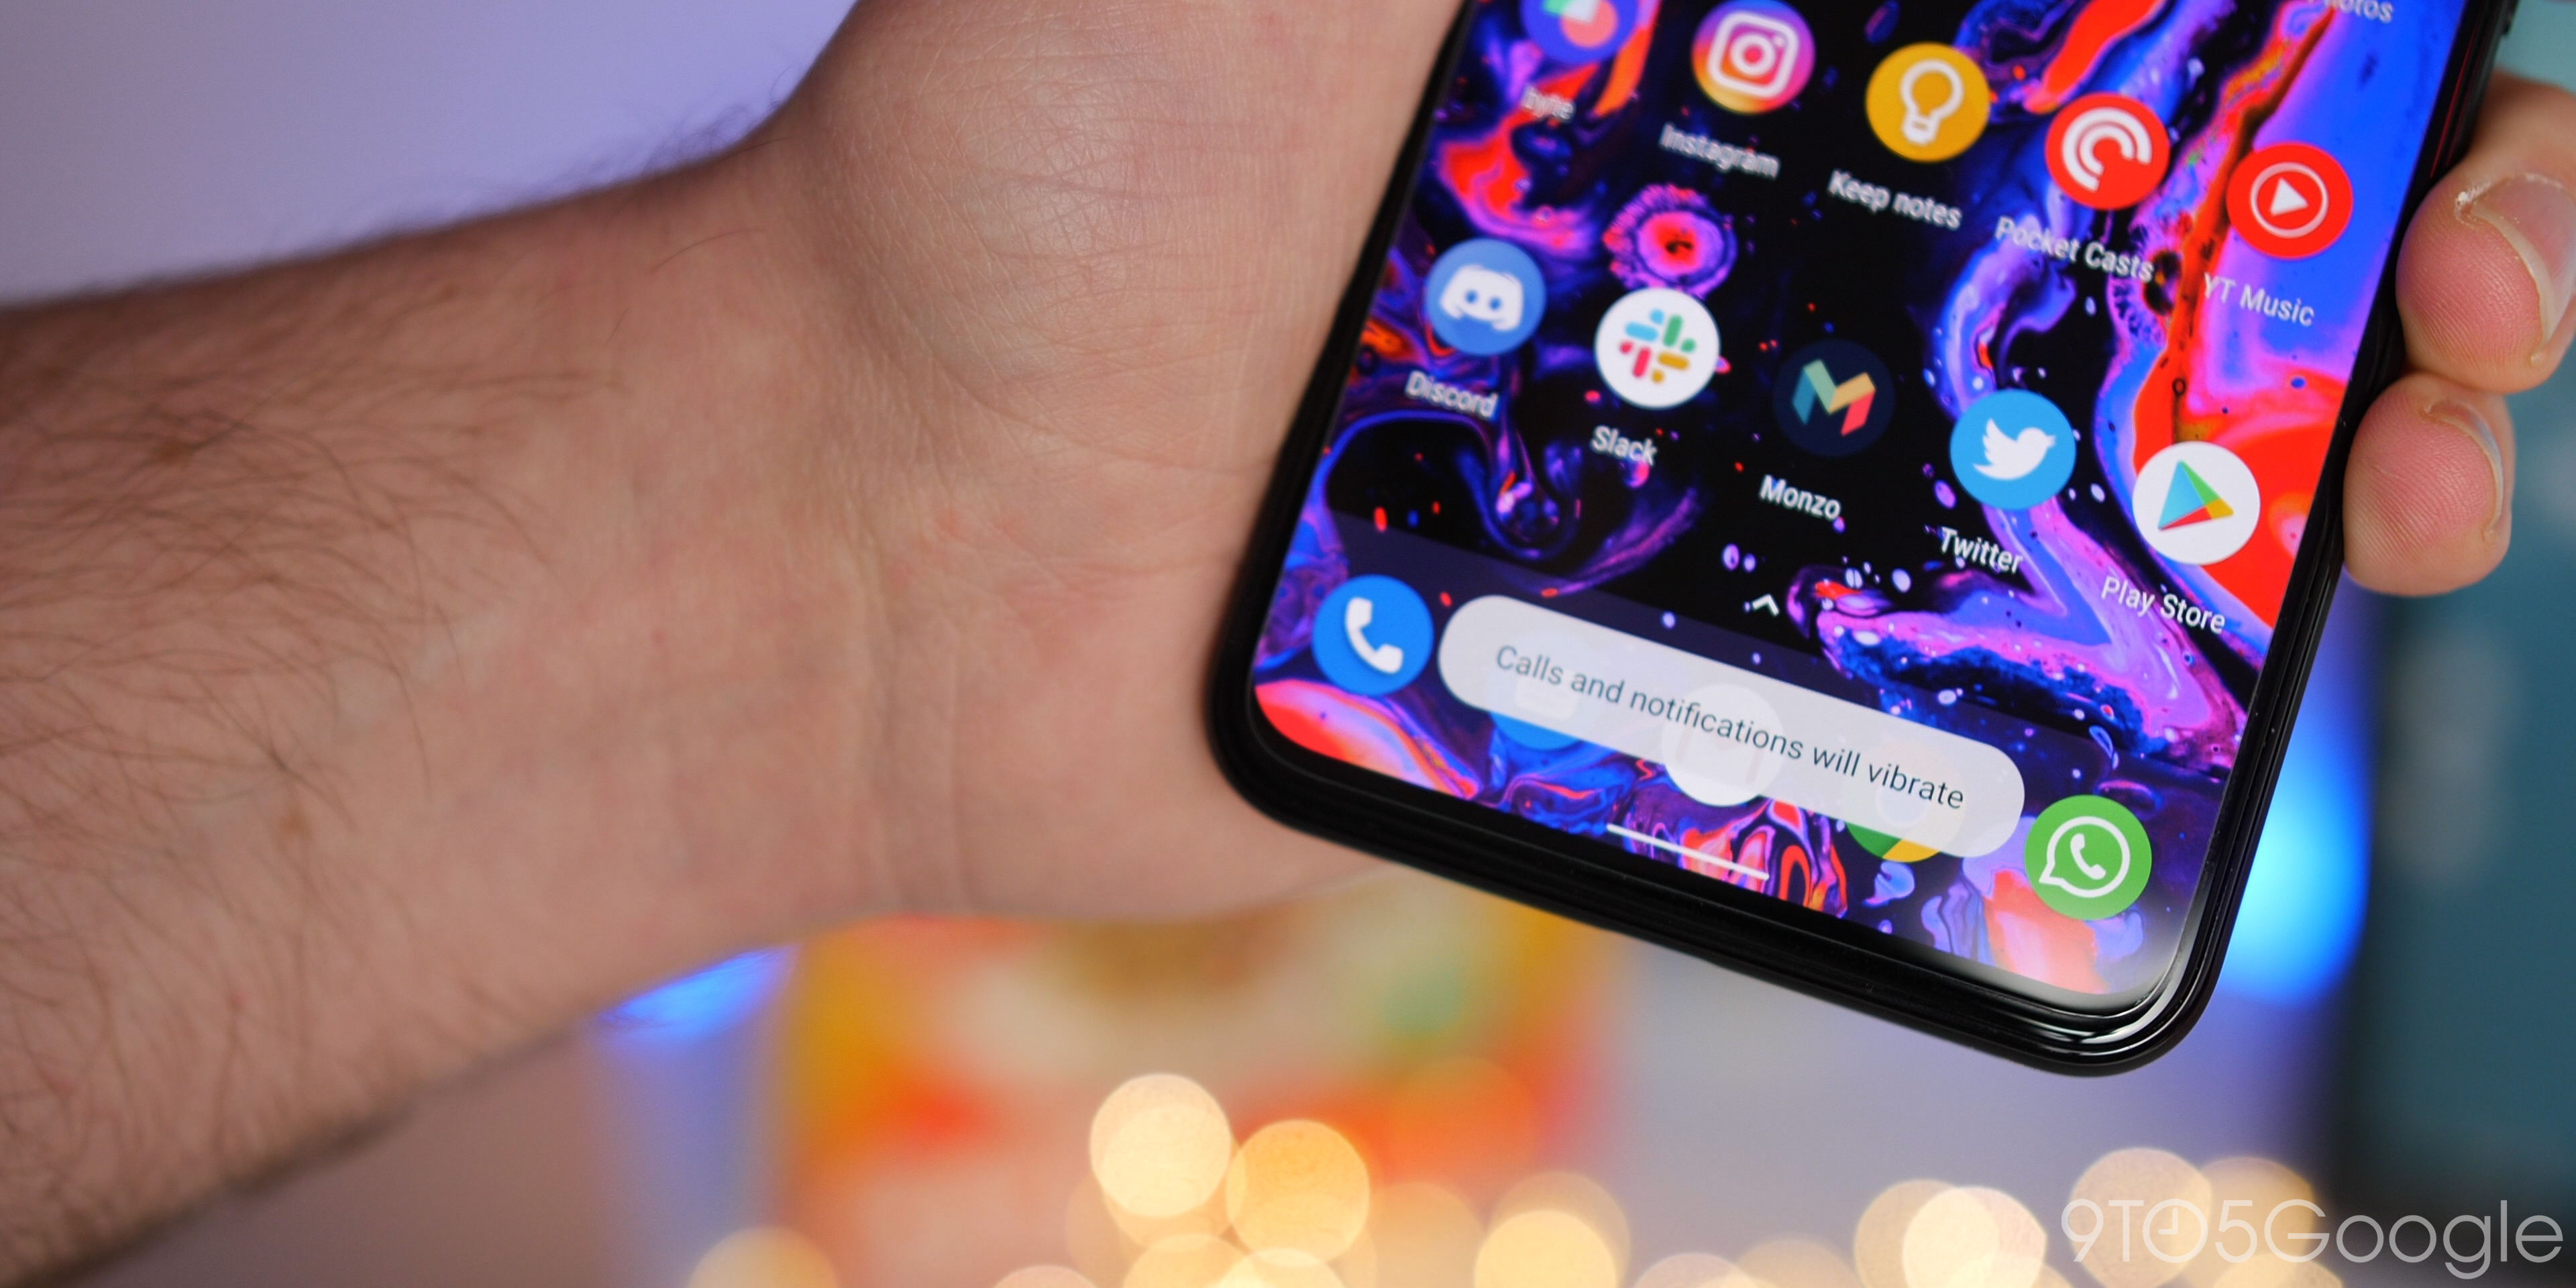 Pixel 4 tips and tricks: How to use the essentials [Video ... - 